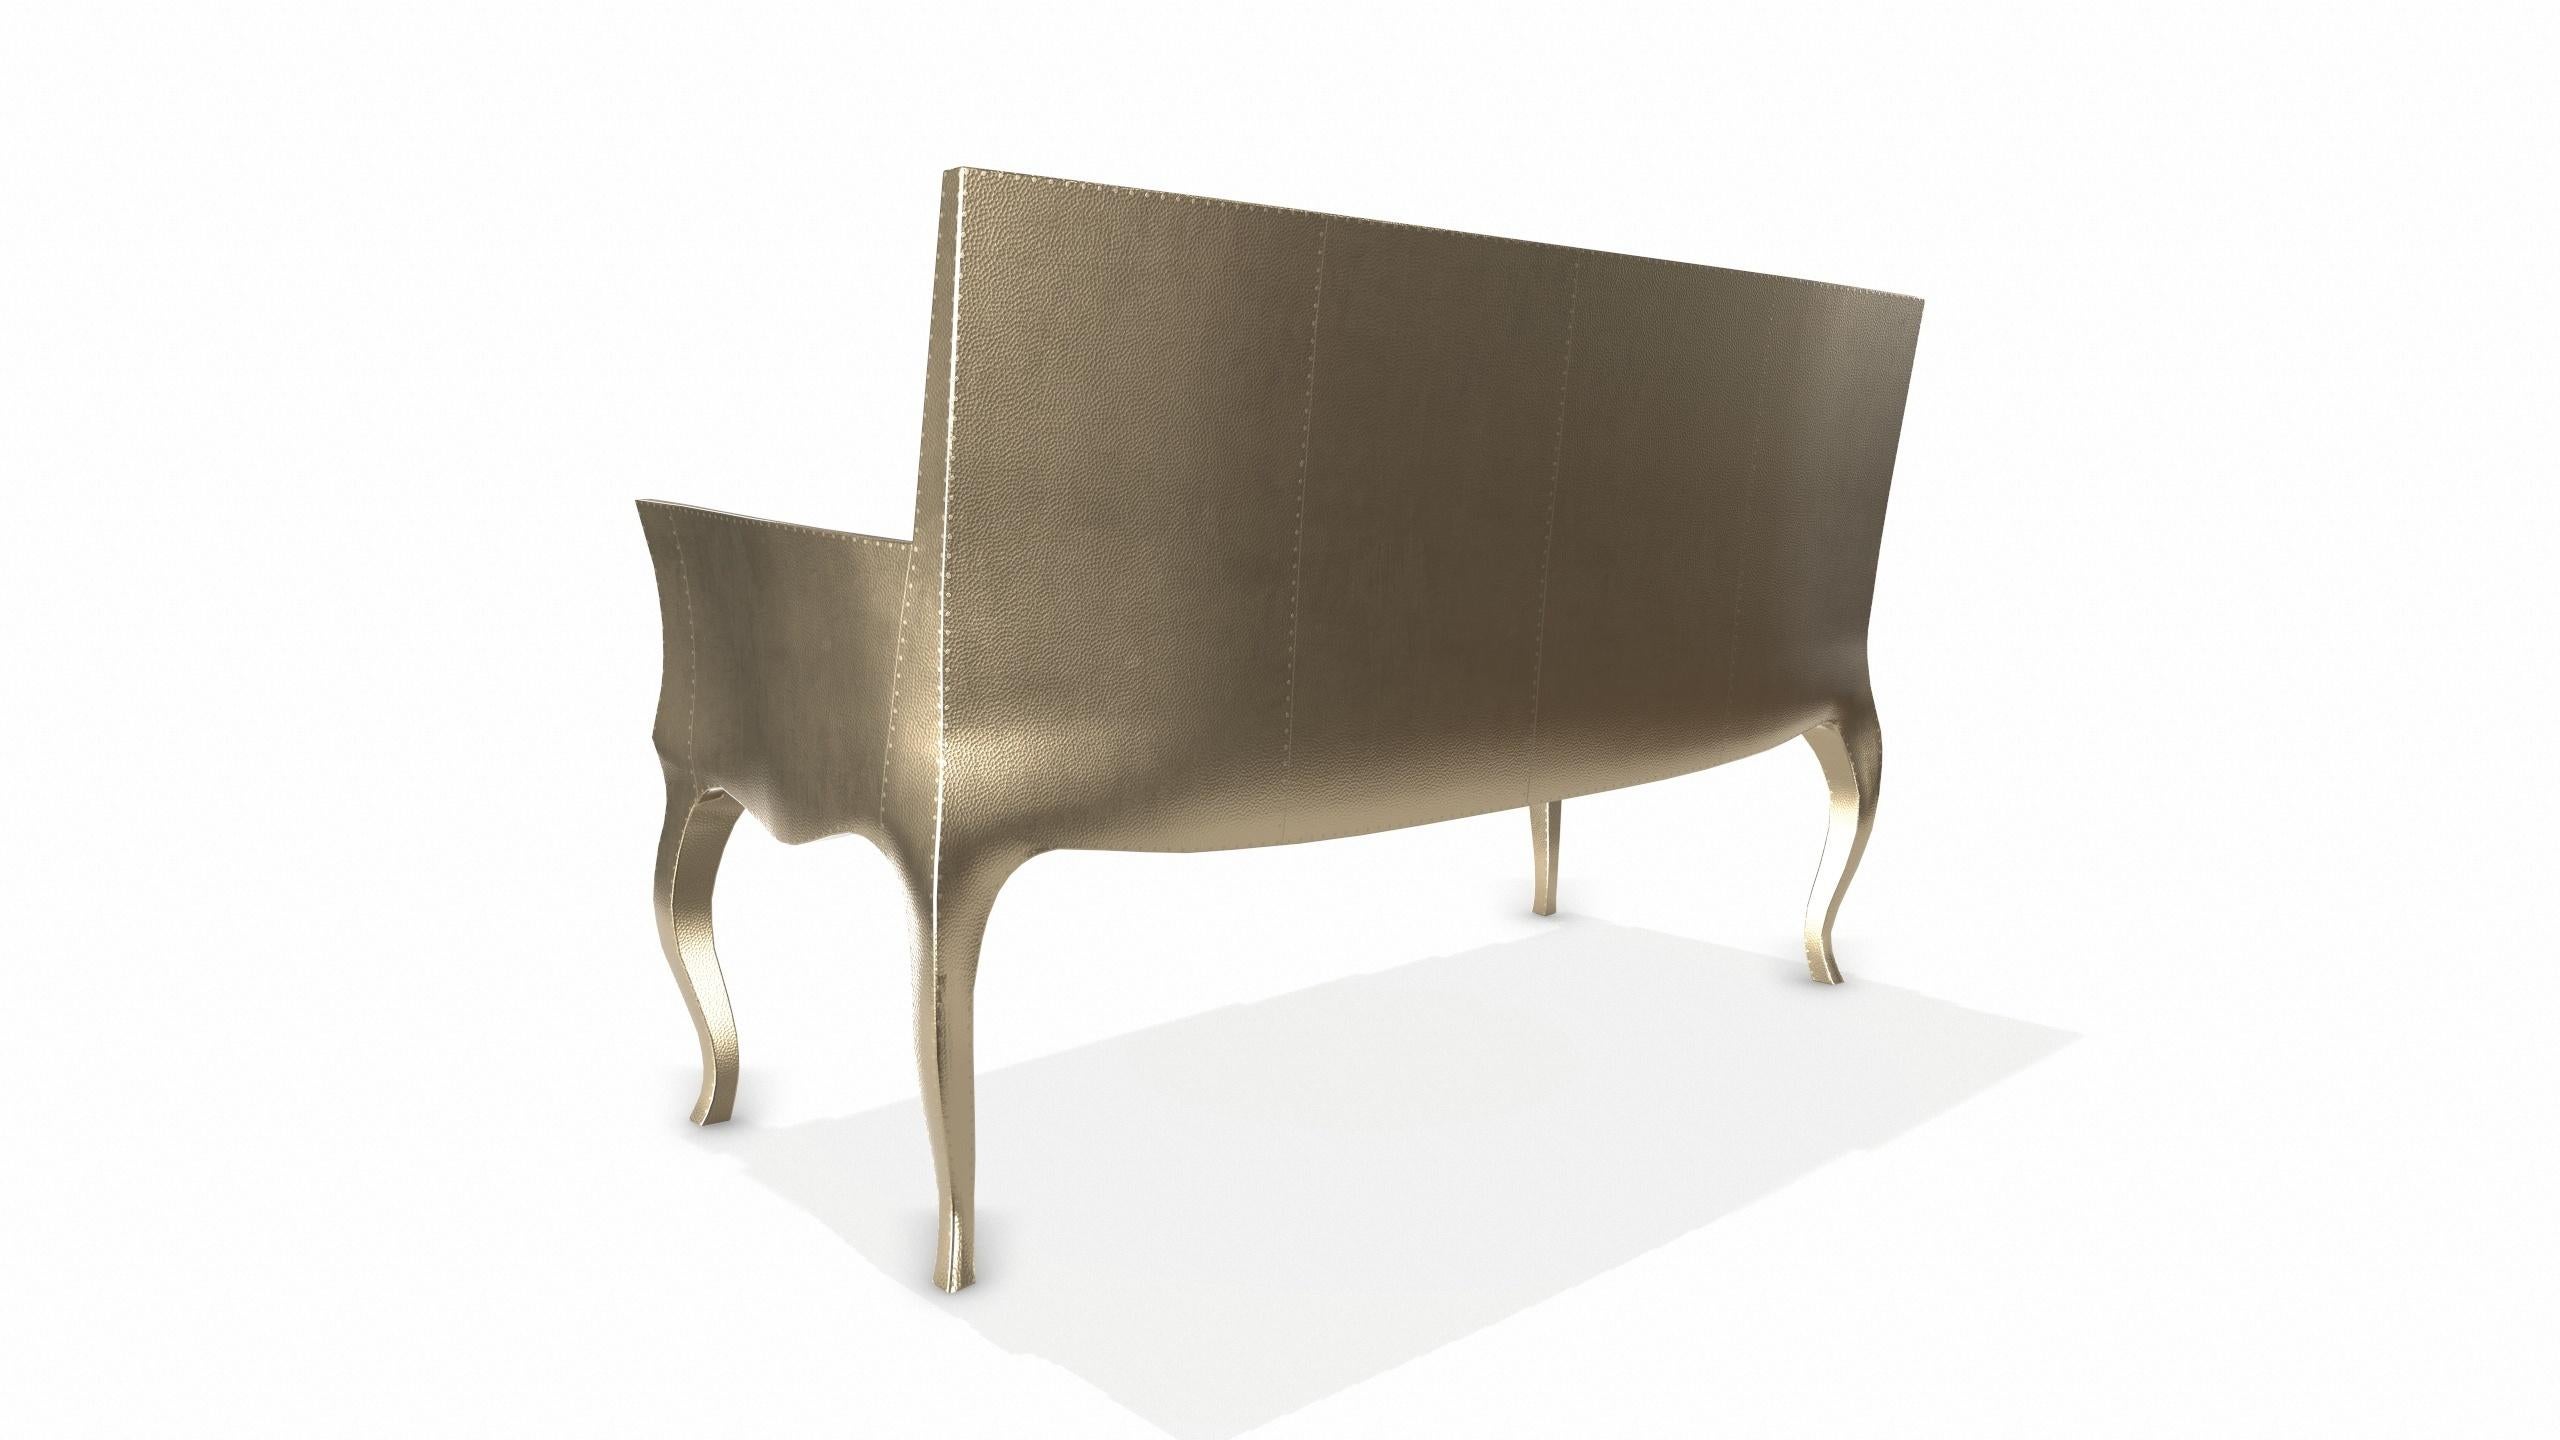 Louise Settee Art Deco Benches in Mid. Hammered Brass by Paul Mathieu For Sale 1